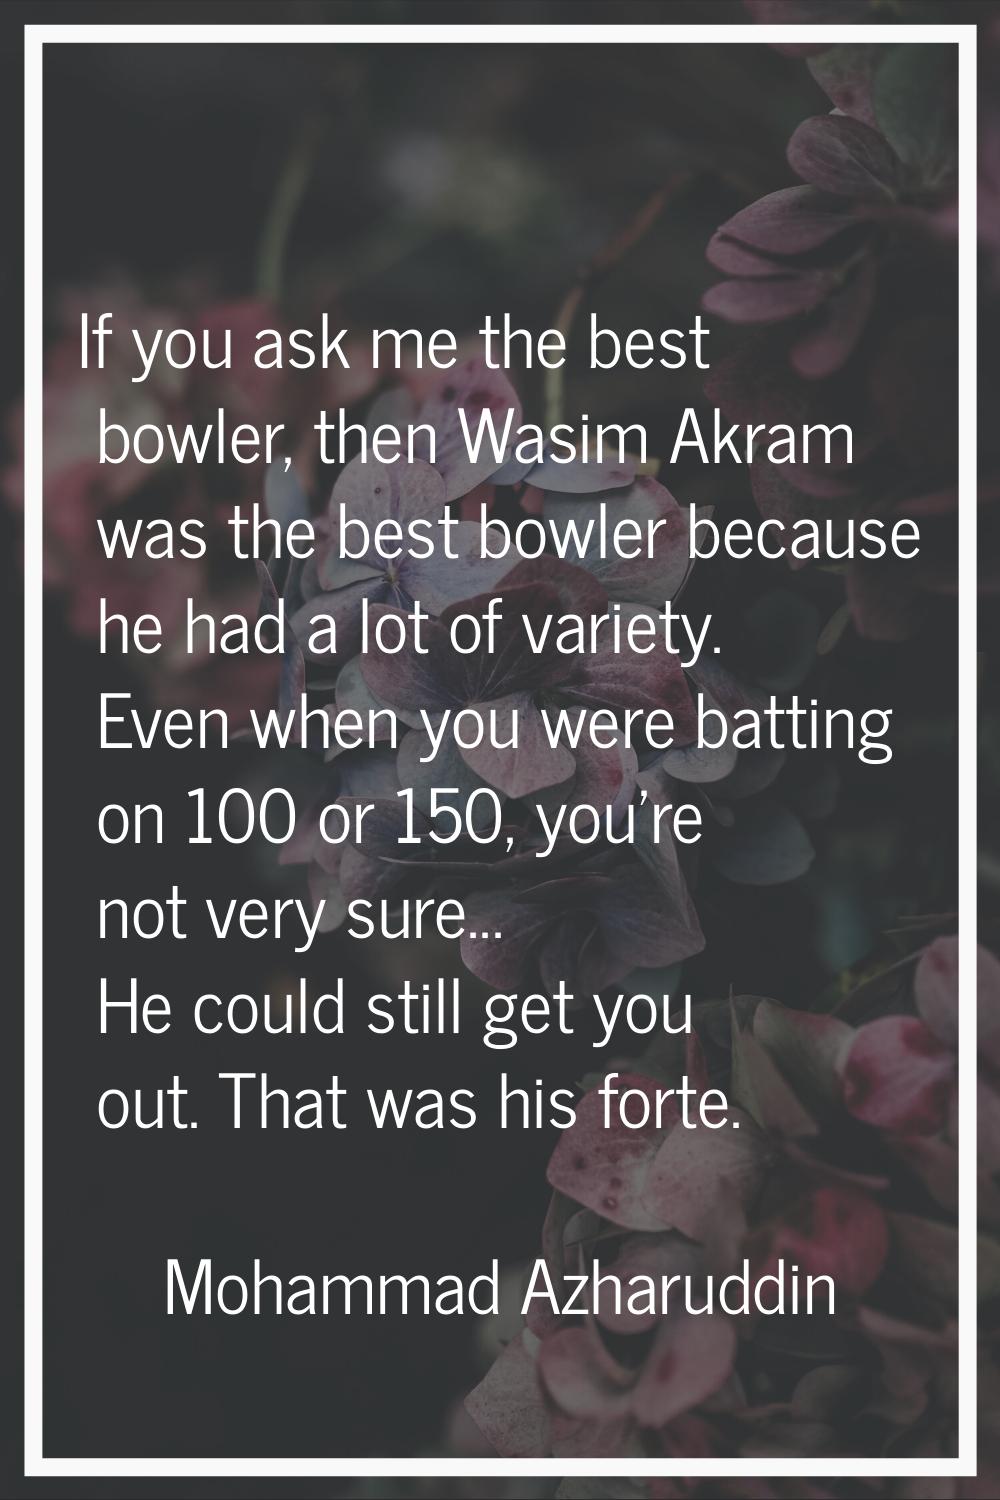 If you ask me the best bowler, then Wasim Akram was the best bowler because he had a lot of variety